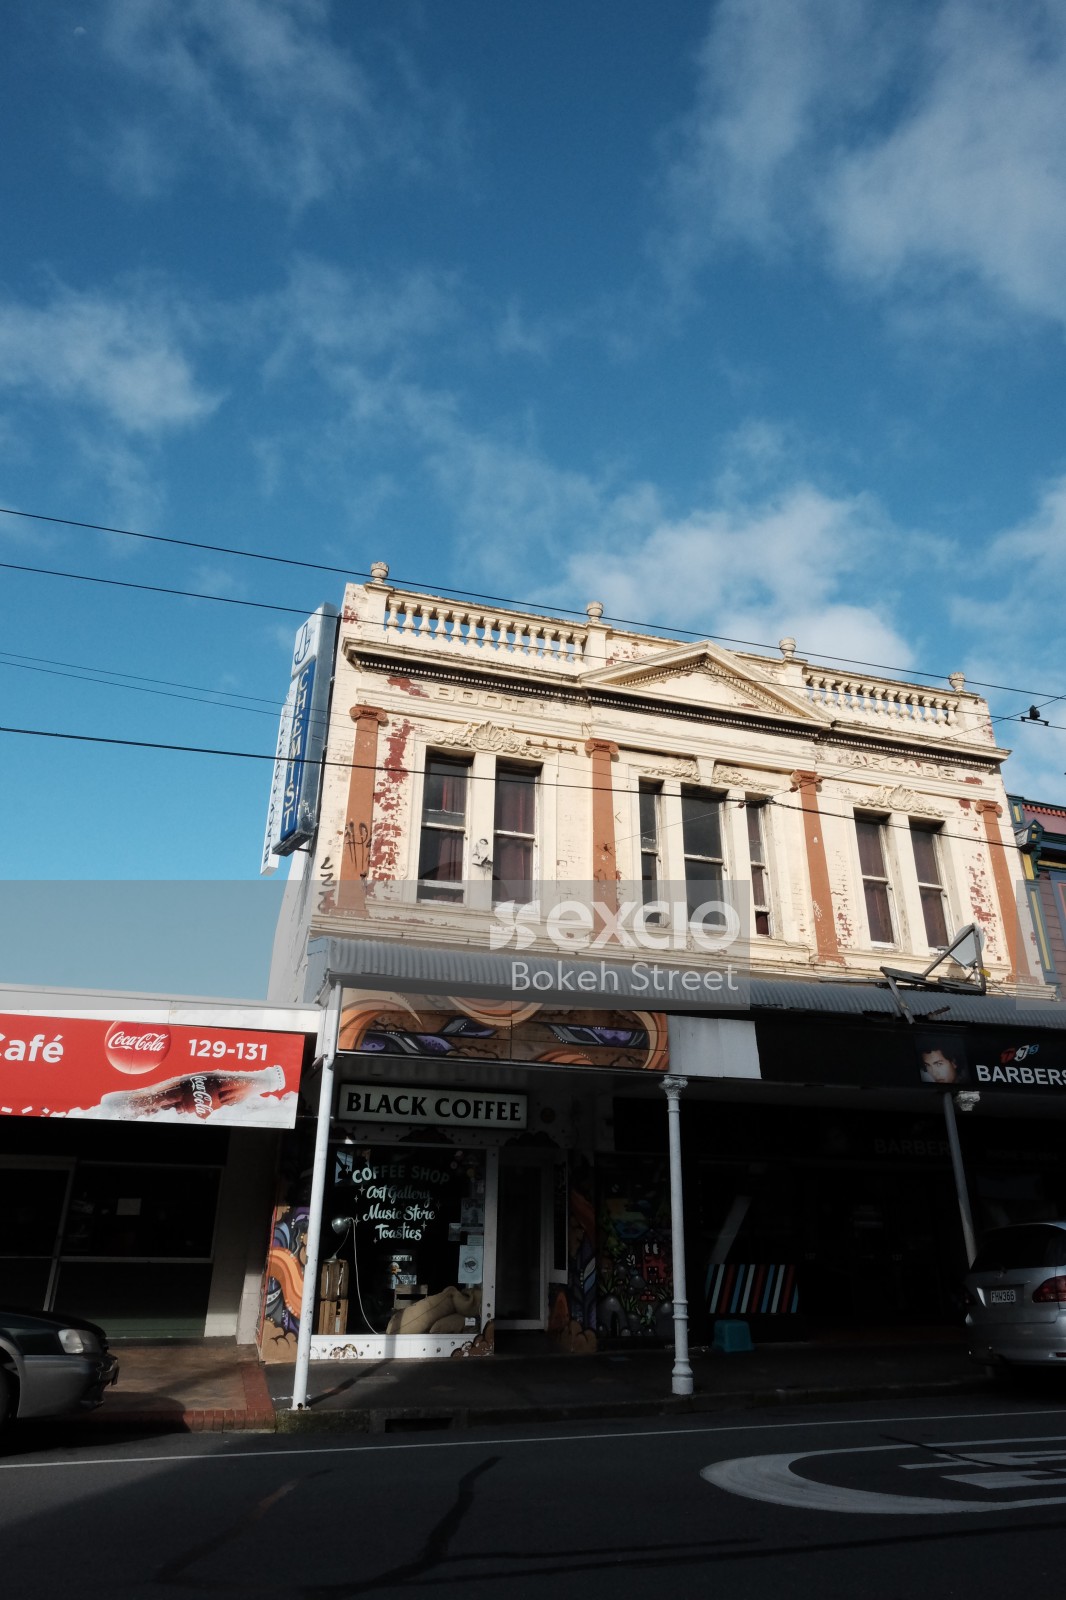 Greek style facade coffee and barber shop in Te Aro